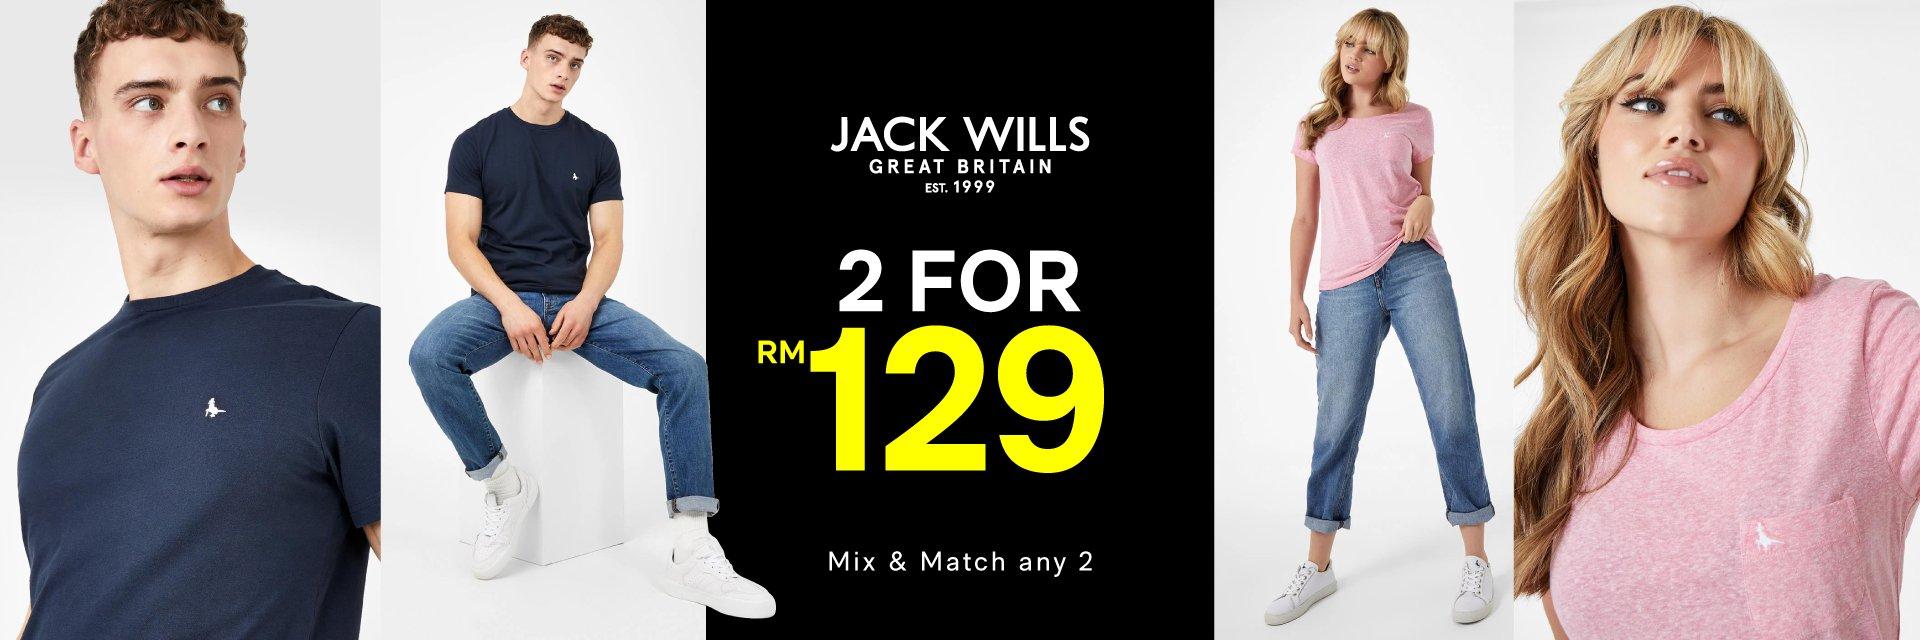 Jack Wills 2 For